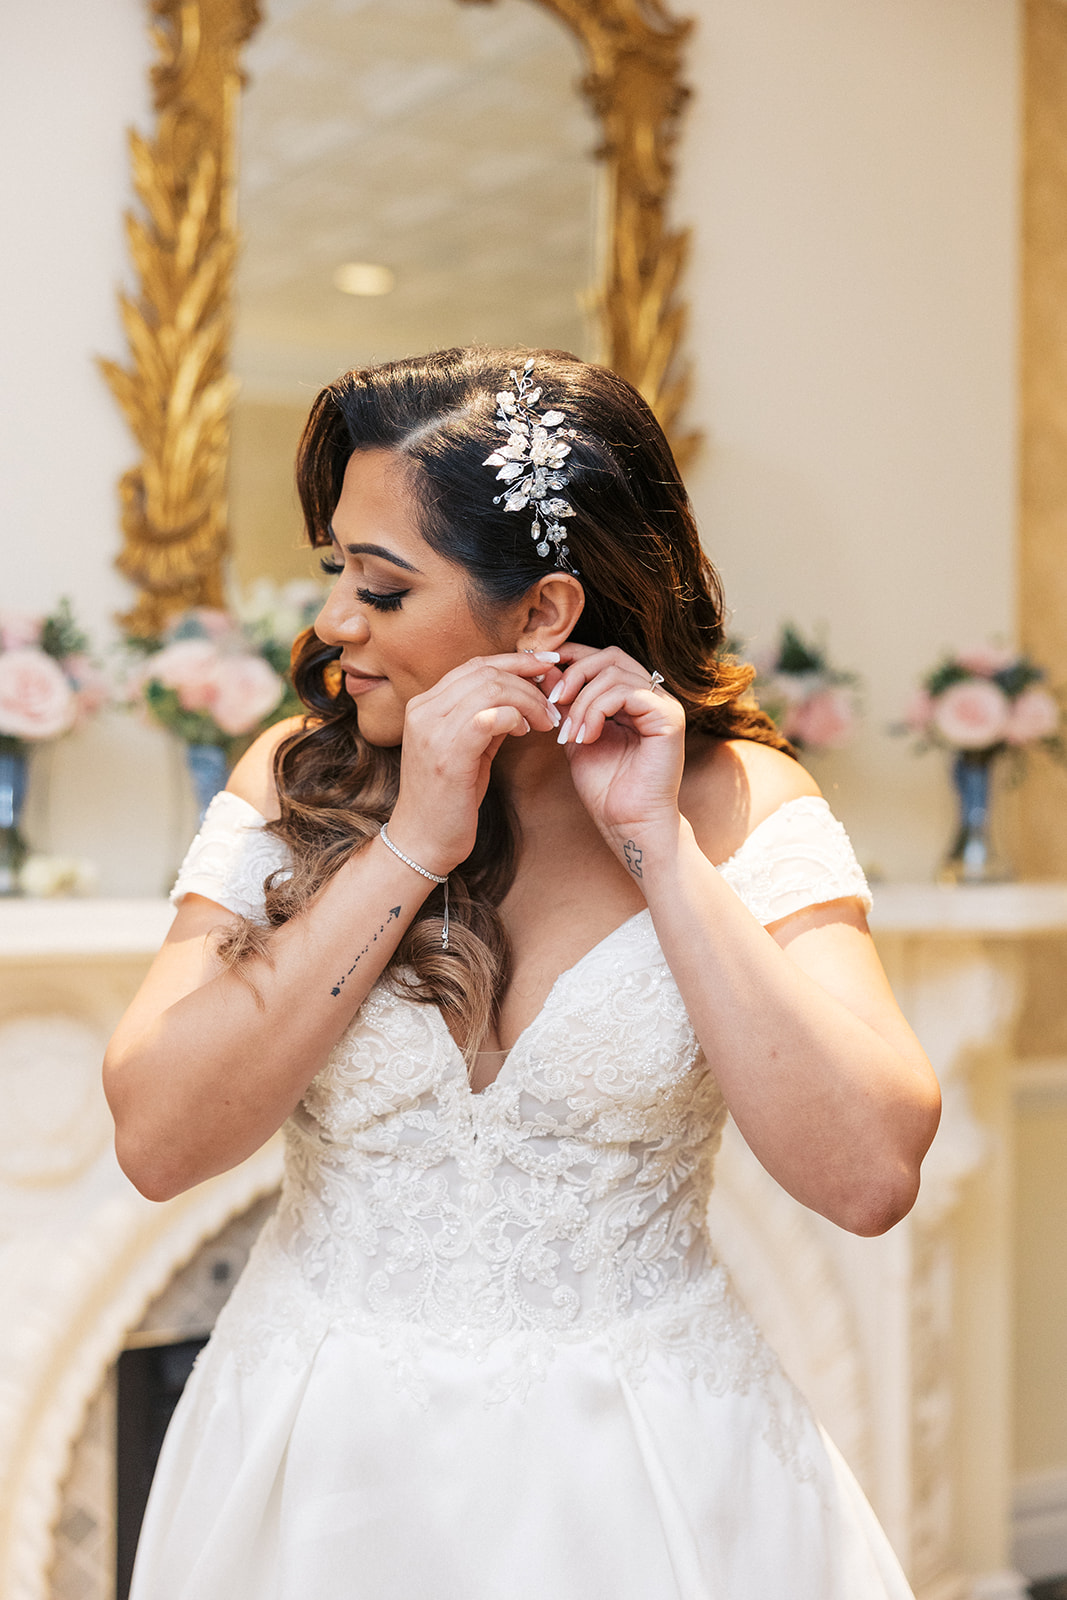 A bride stands in an ornate dressing room putting on her earrings at her The Palace At Somerset Wedding